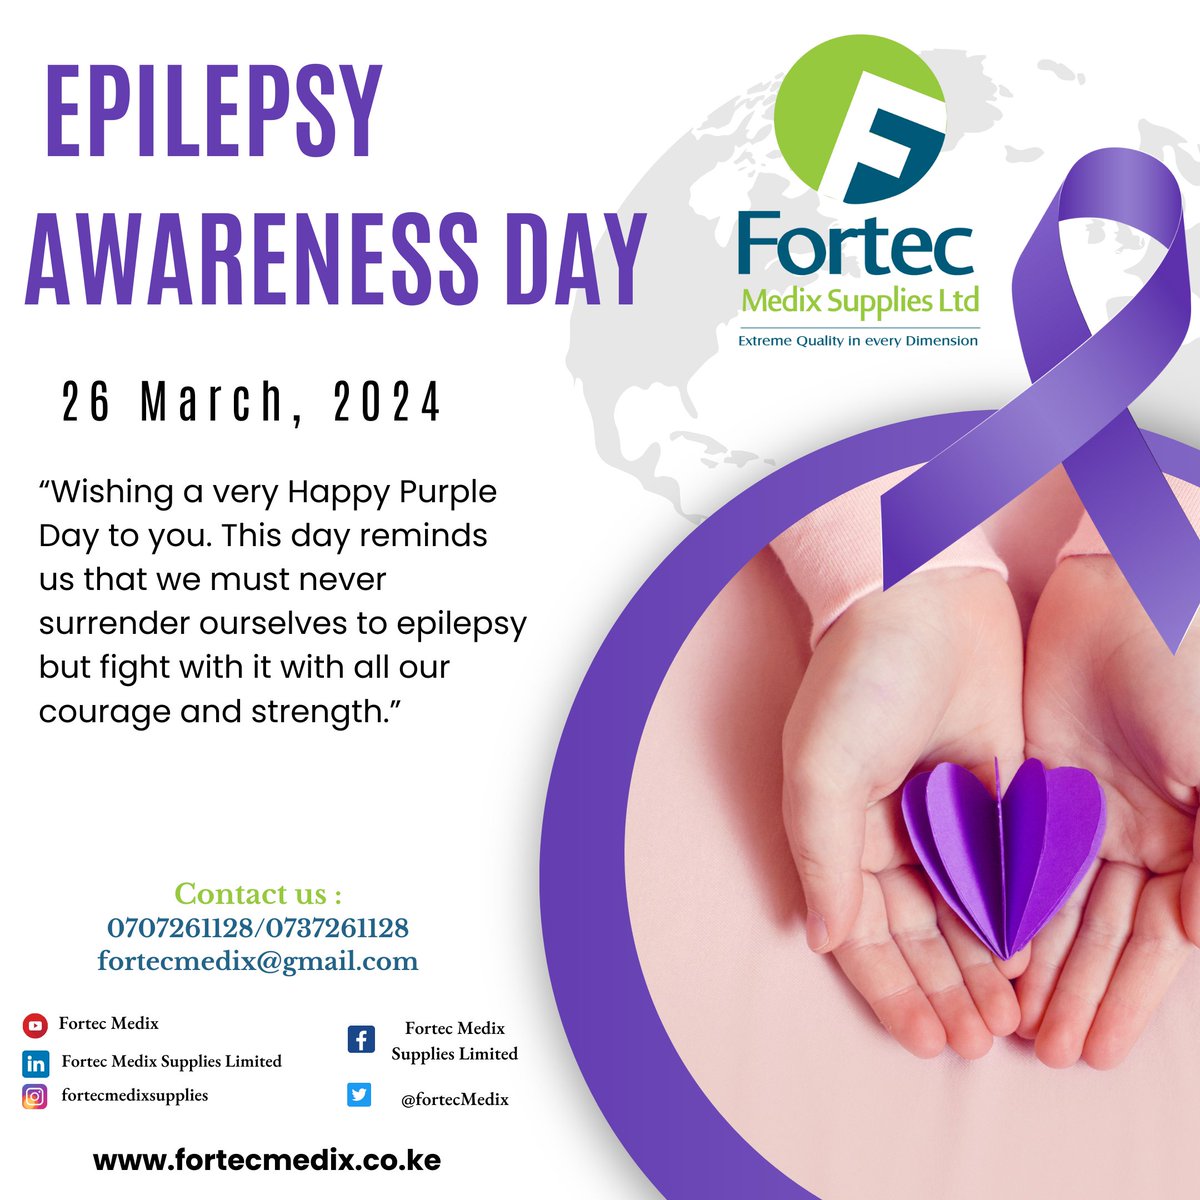 This world would become a much happier and more beautiful place to live if we learned the right things about epilepsy.
#epilepsy #epilepsyawareness #epilepsywarrior #endepilepsy  #epilepsyawarenessday #epilepsyproblems #fortec #fortecmedix